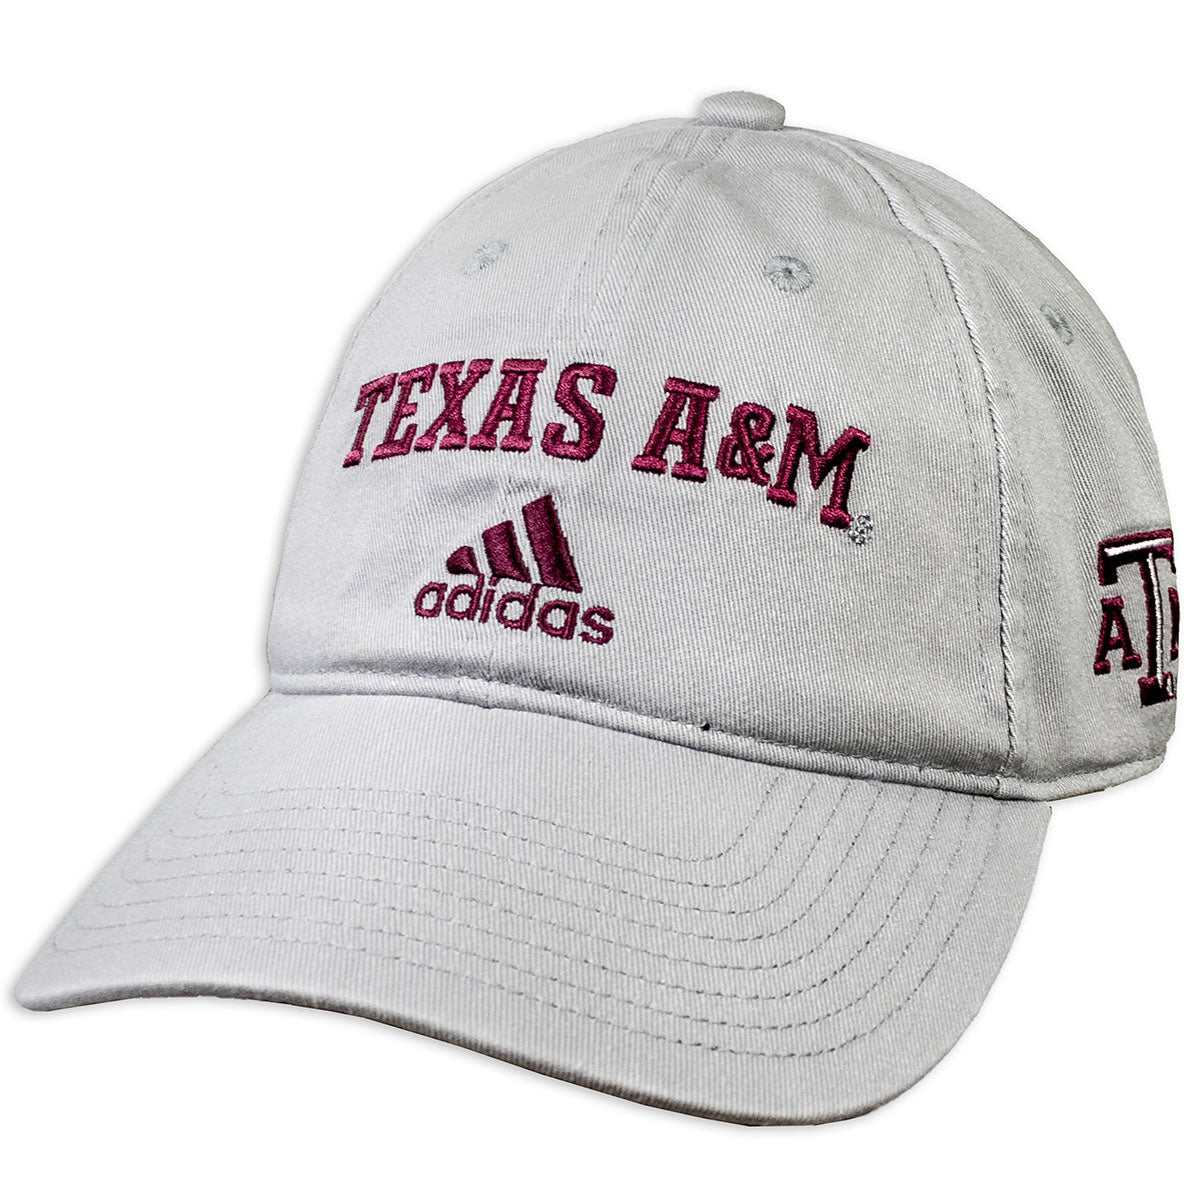 Texas A&M Adidas Bos Cotton Slouch Adjustable Hat